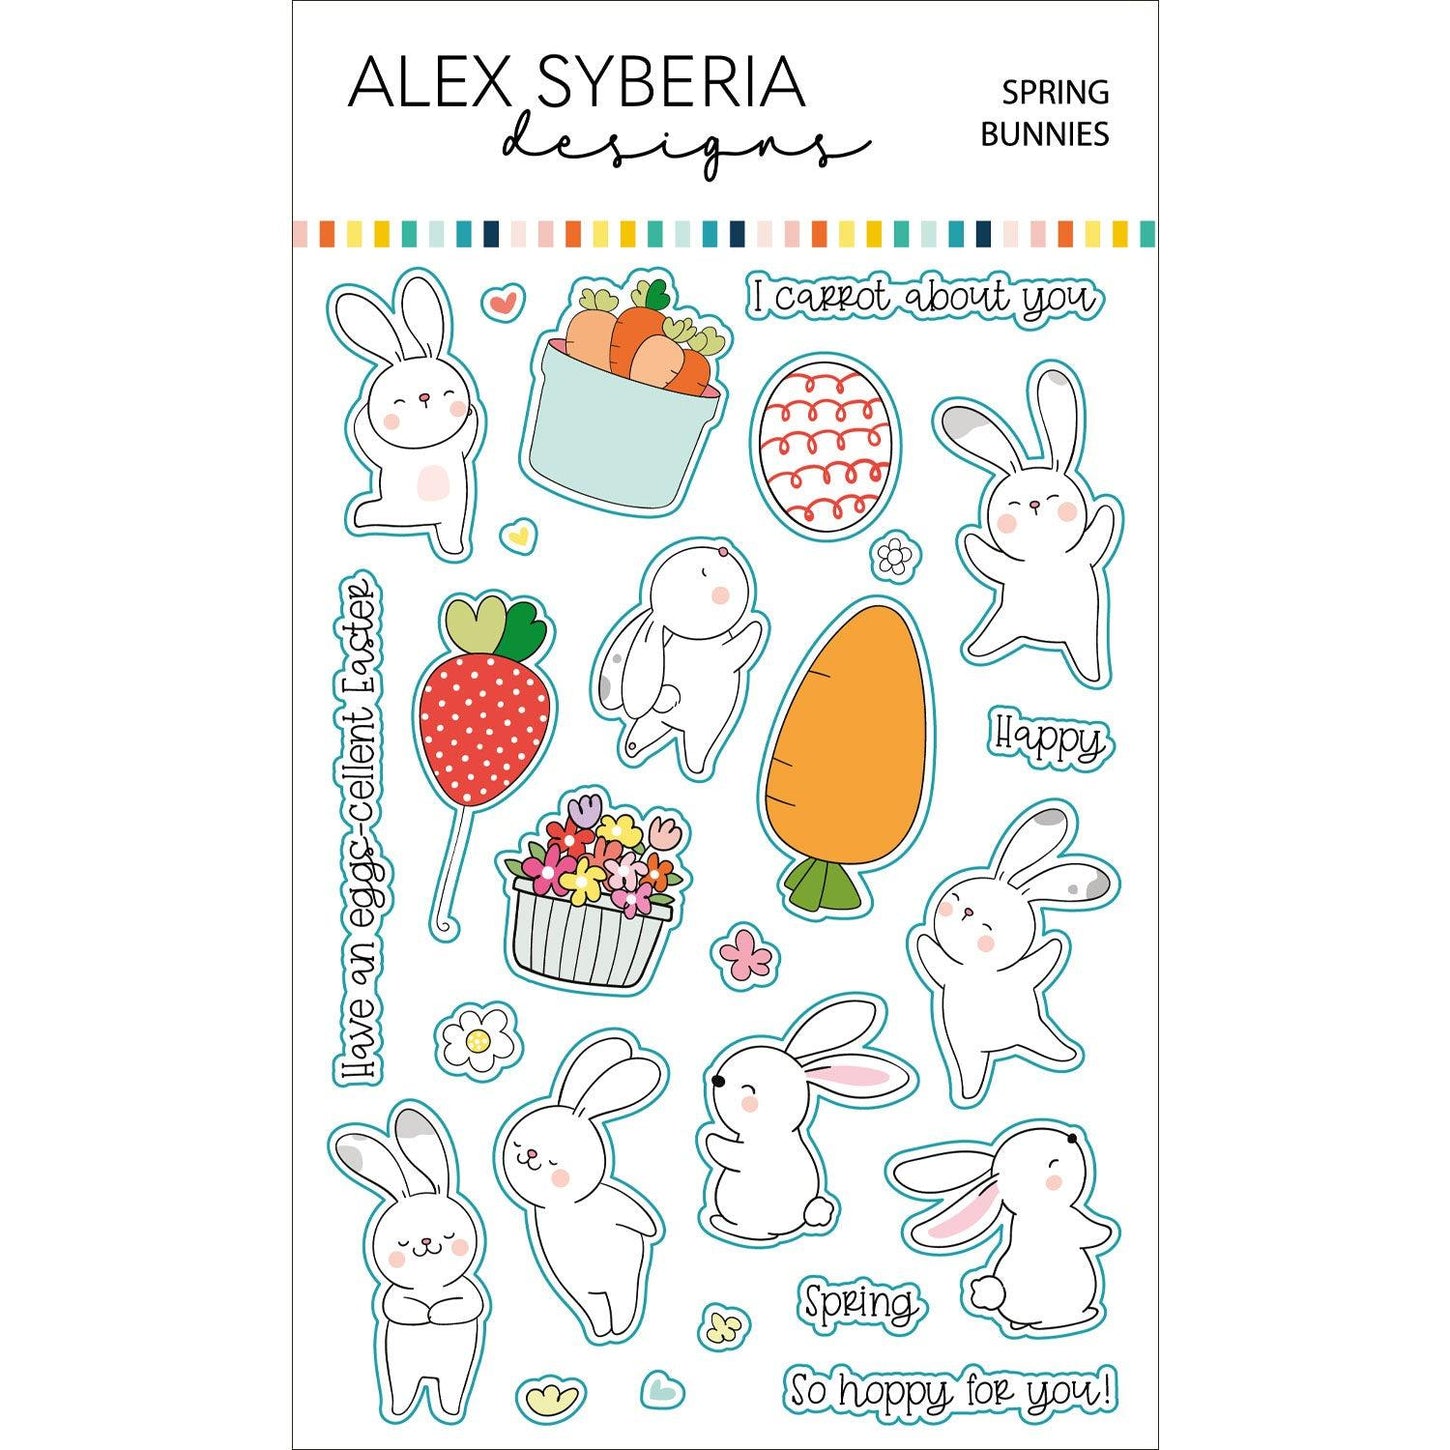 alex-syberia-designs-spring-bunny-stamp-egg-easter-happy-spring-dies-carrot-cardmaking-handmadecards-flowers-colouring